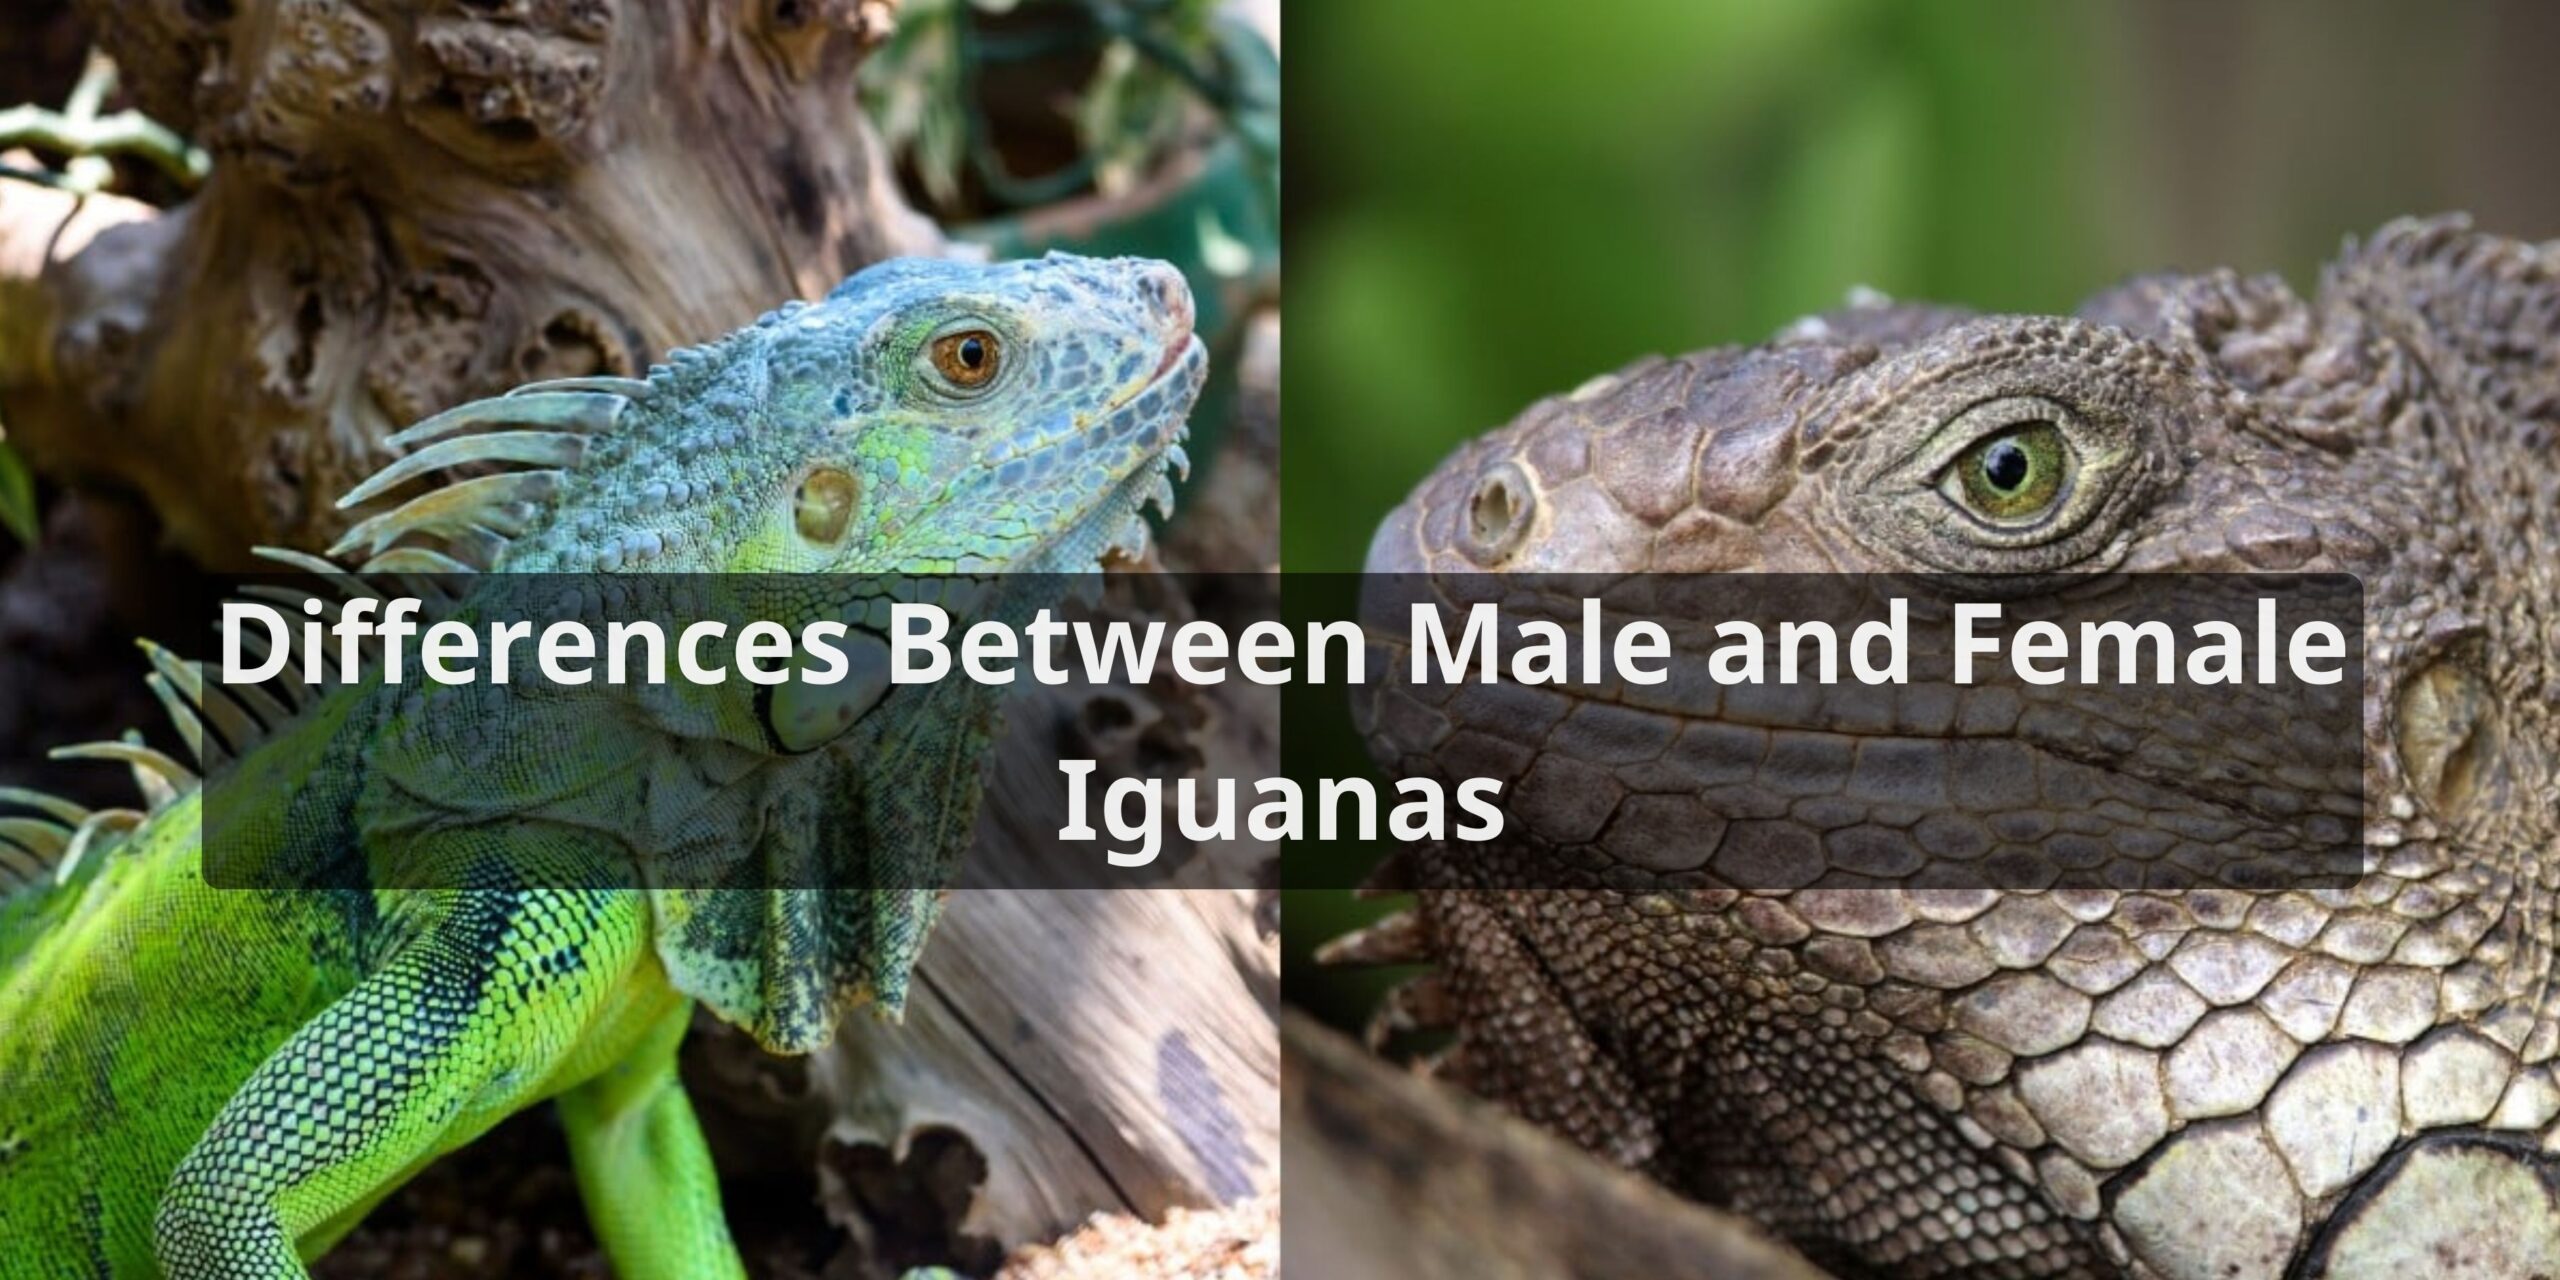 Differences Between Male and Female Iguanas